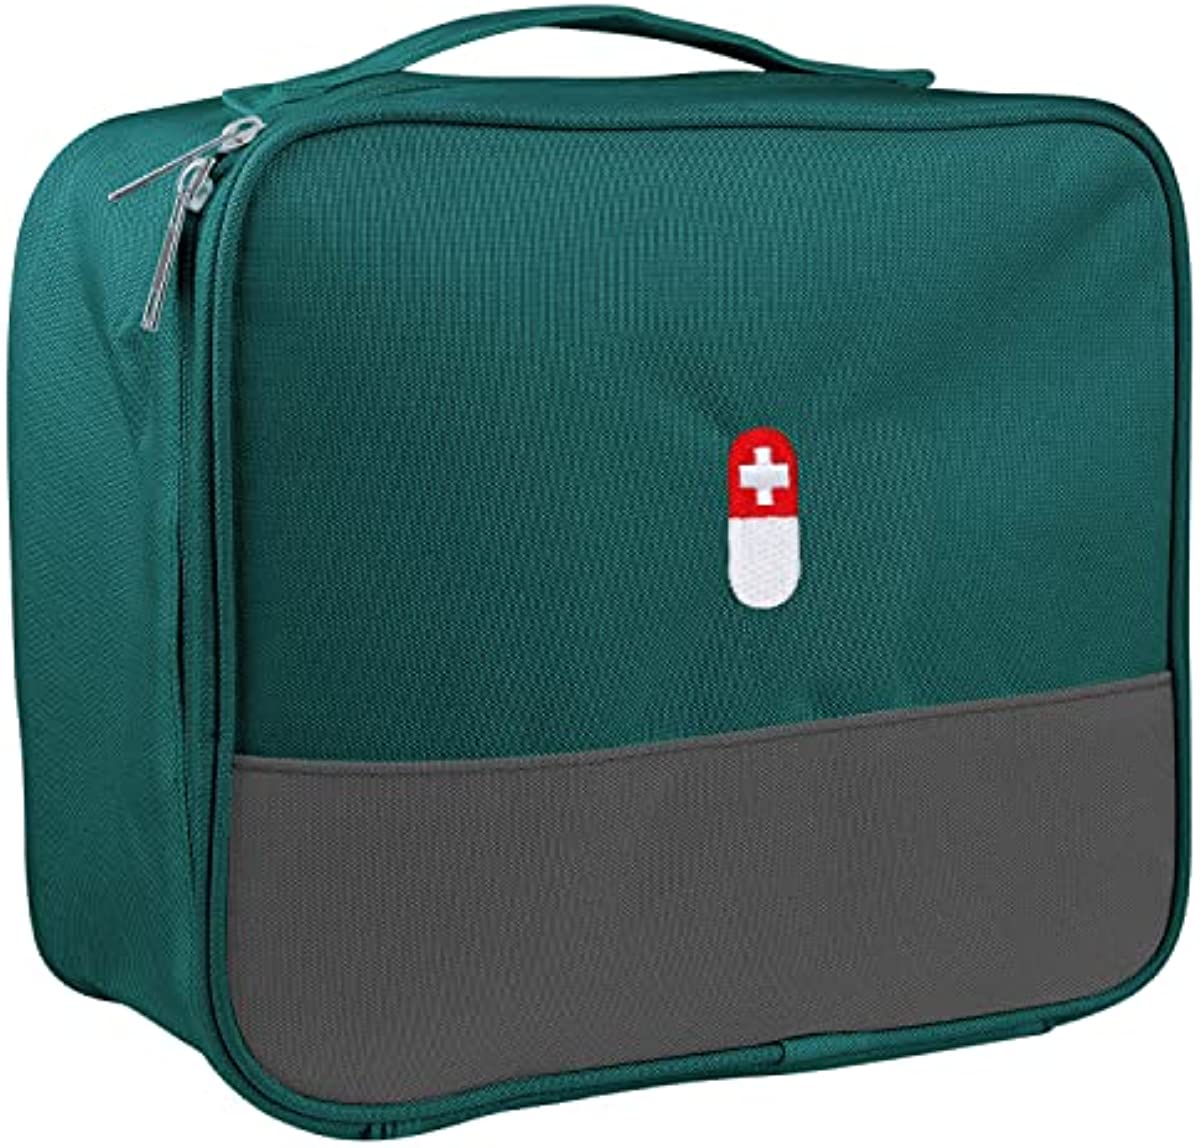 First Aid Bag, Empty Medical Supplies Organizer Bag Portable Trauma Kit for Home Office Kitchen Traveling Hiking Camping Backpacking Cycling, Green